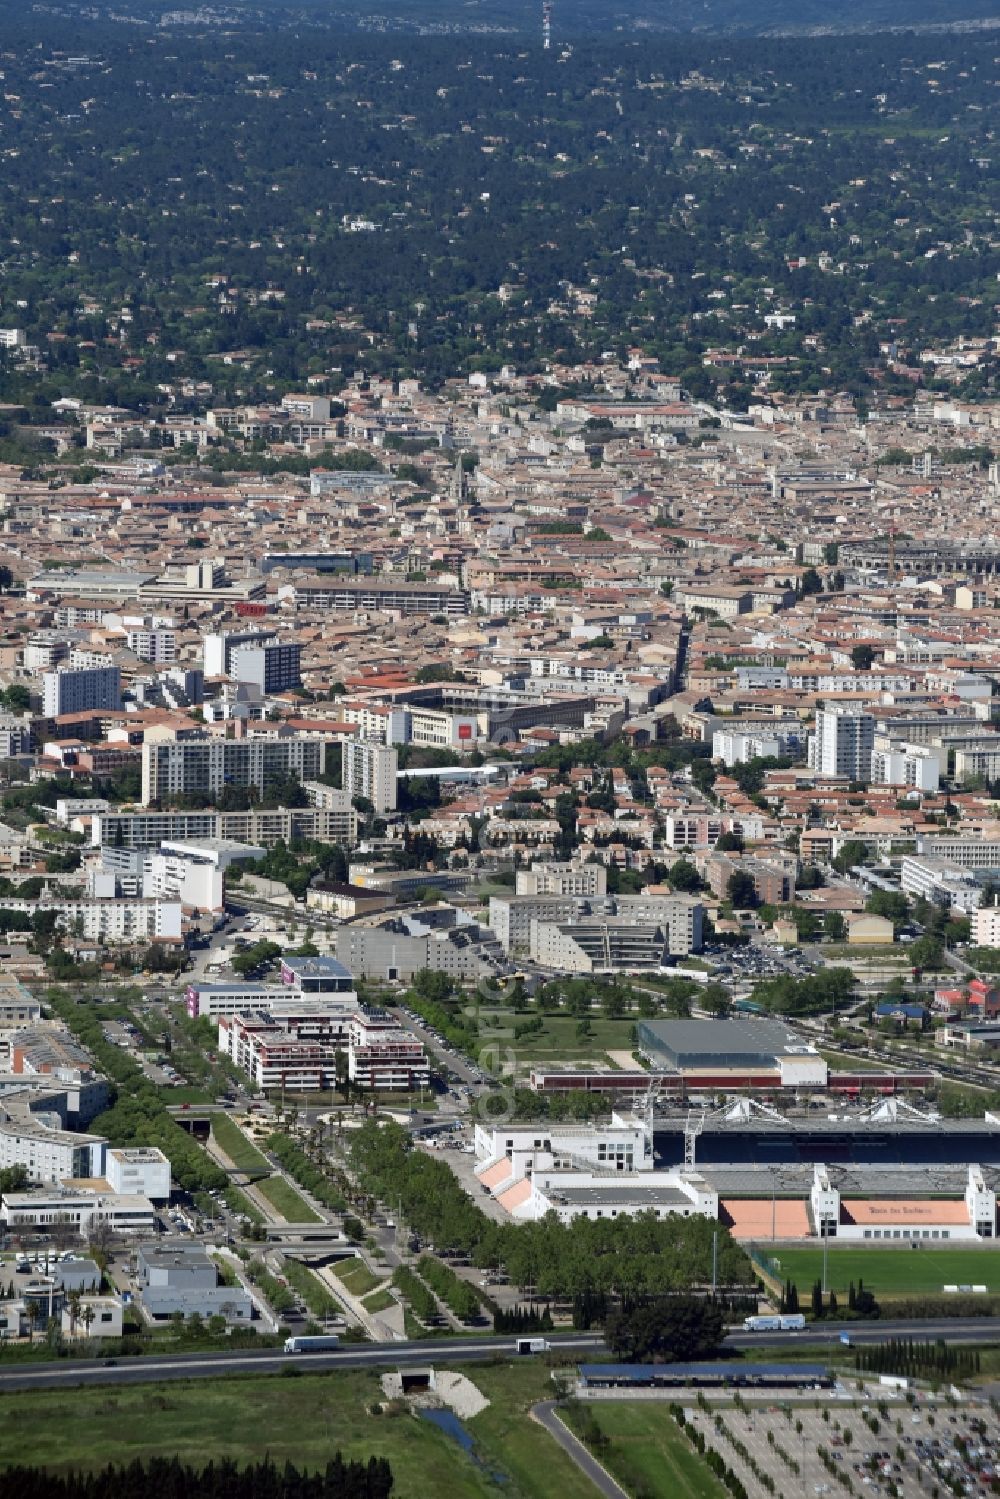 Nîmes from above - City view of the city area of in Nimes in Languedoc-Roussillon Midi-Pyrenees, France